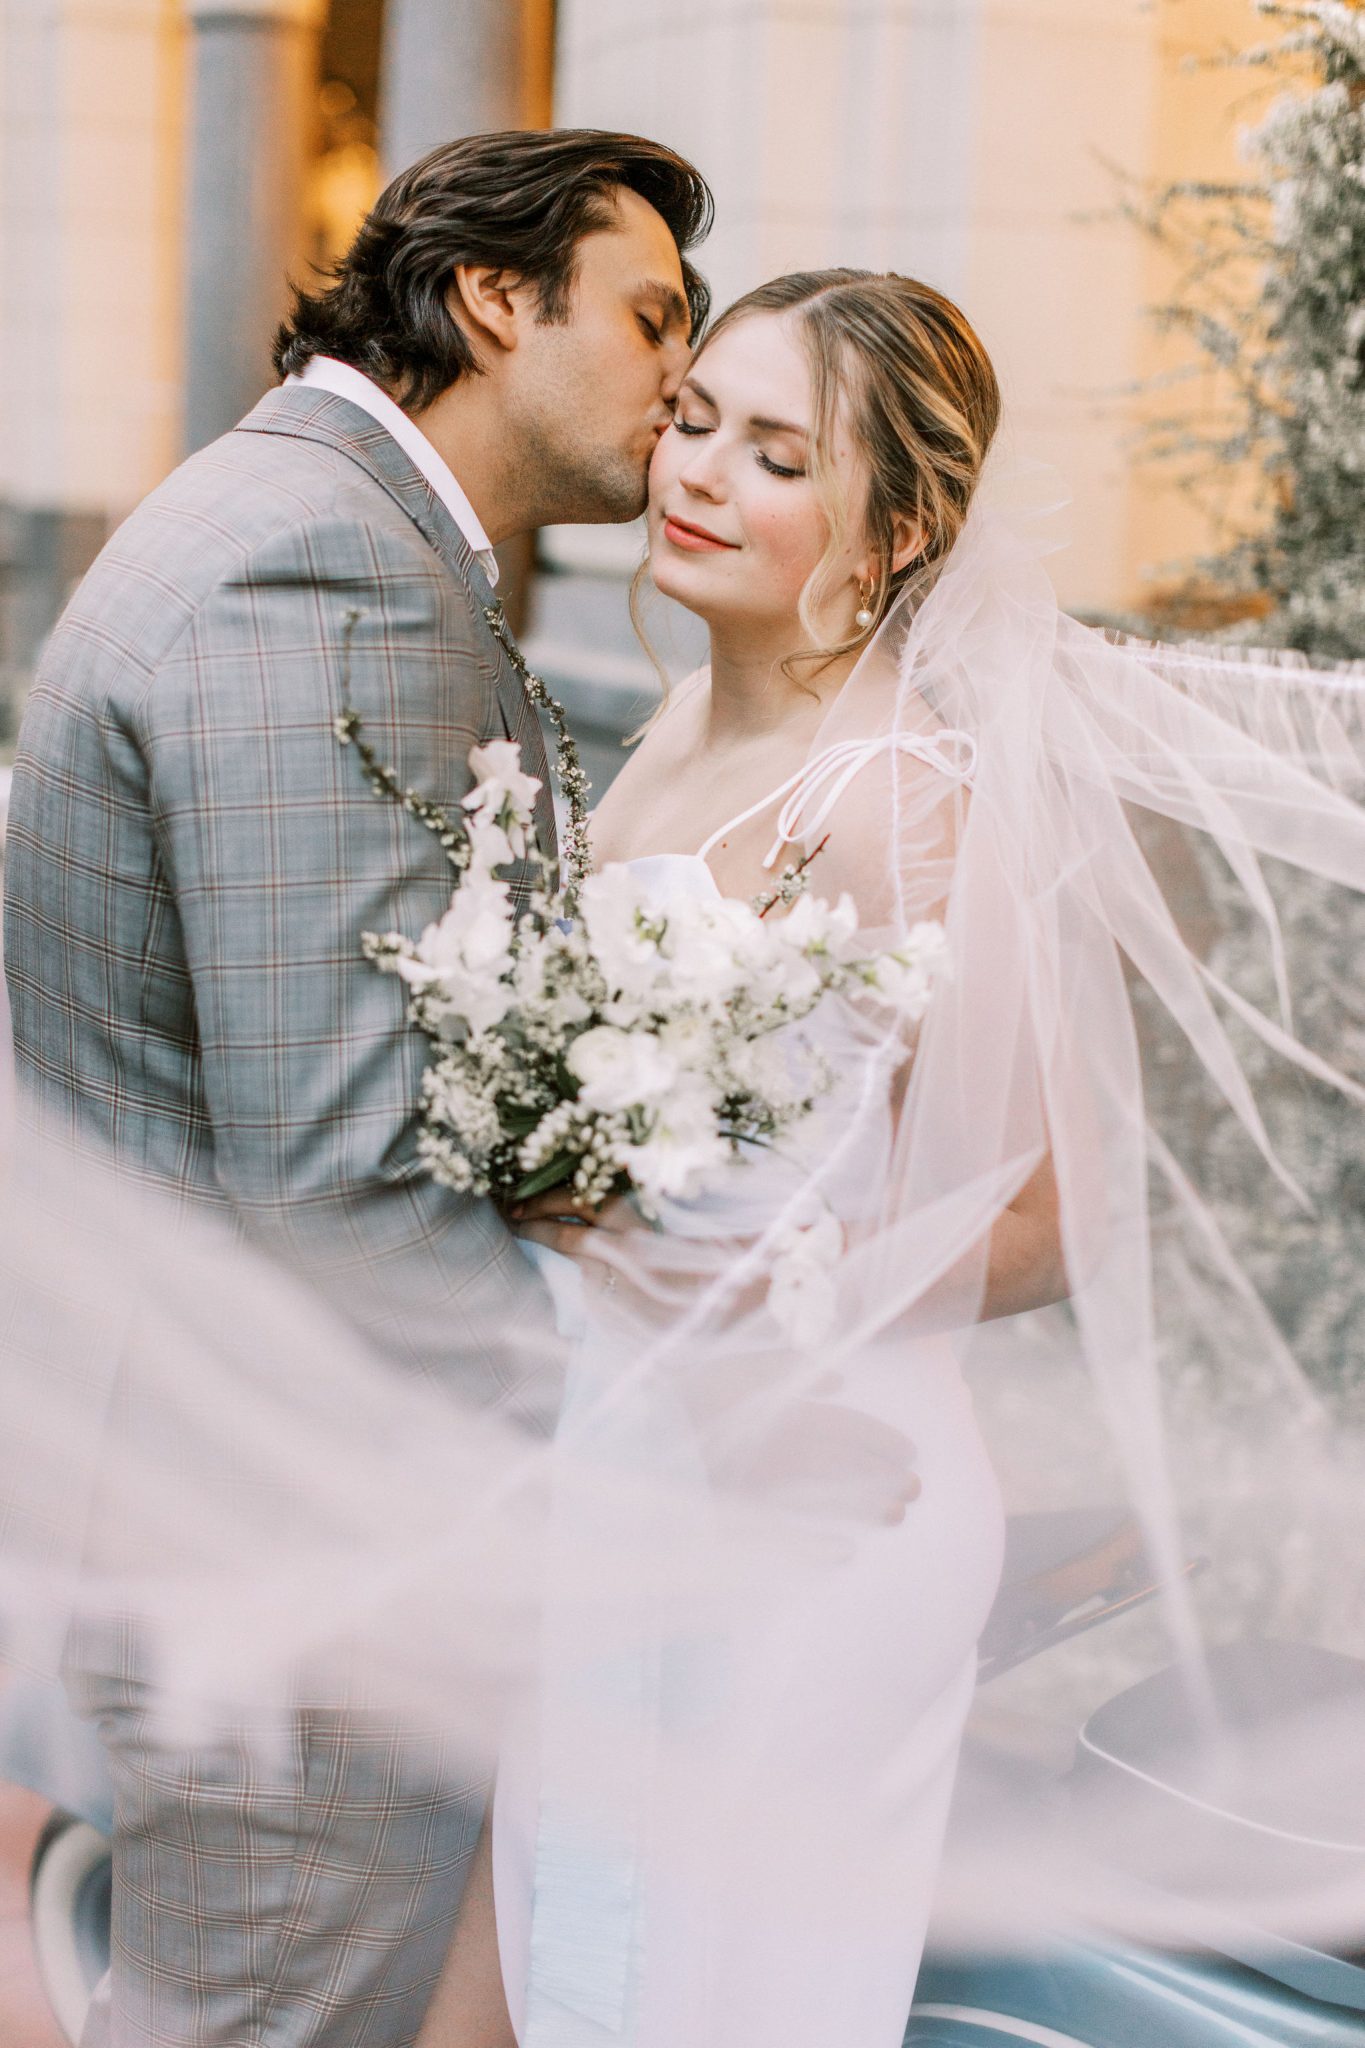 Groom in a modern grey suit kisses his bride on the cheek while her wedding veil flies in the wind